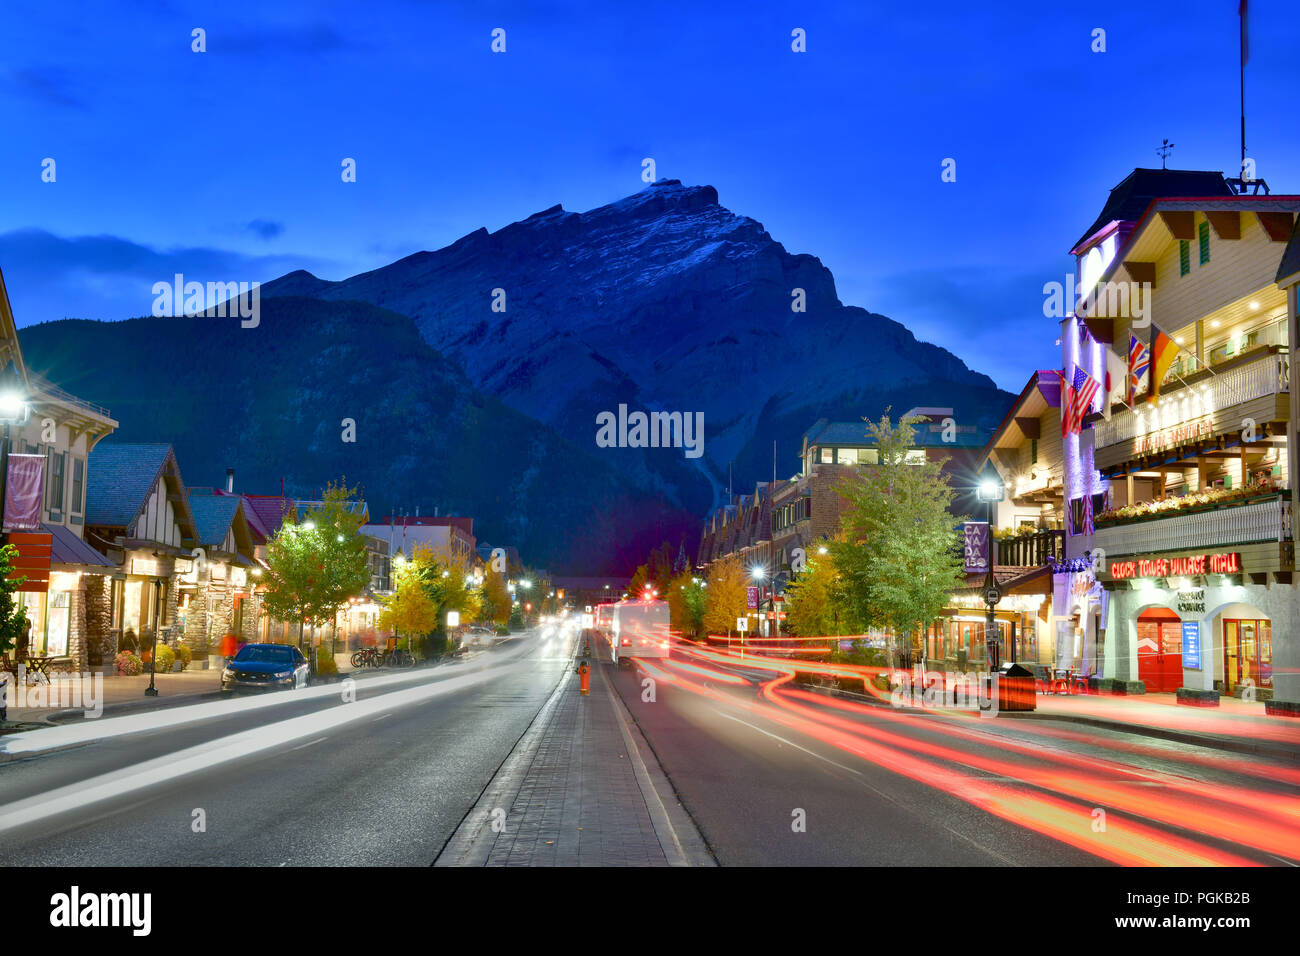 Street view of famous Banff Avenue at twilight time. Banff is a resort town and one of Canada's most popular tourist destinations. Stock Photo